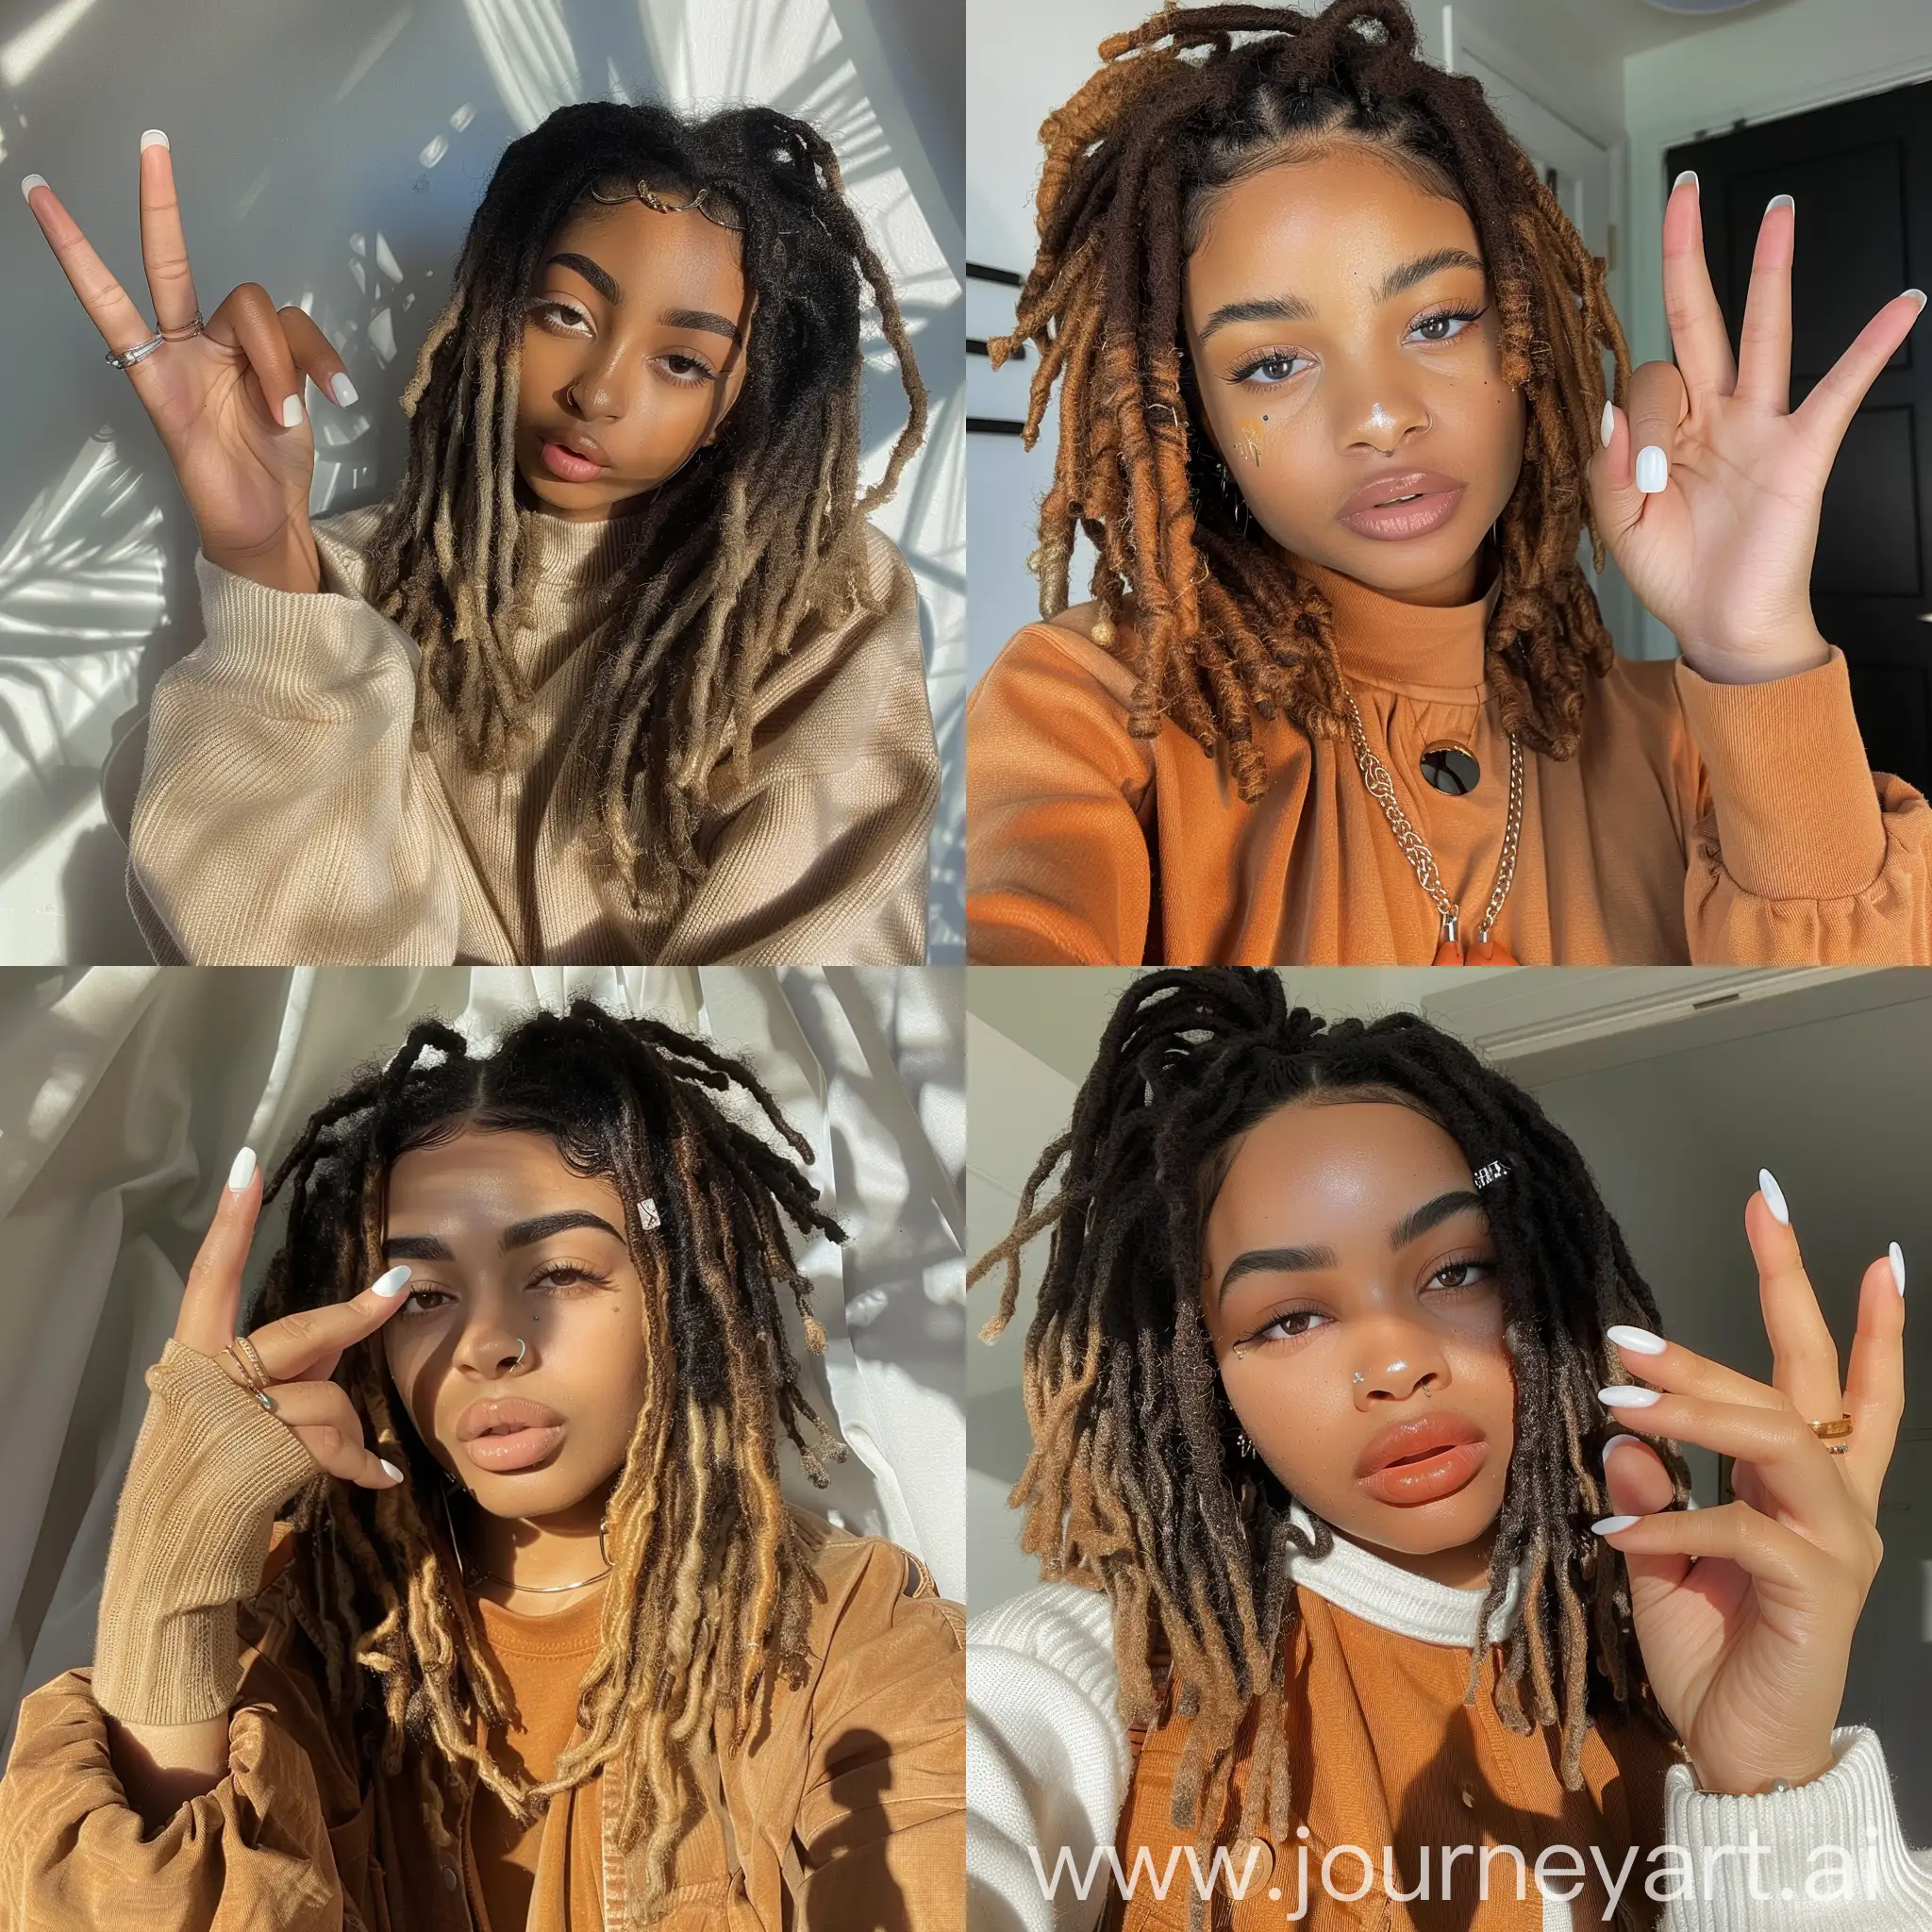 Trendy-Black-Teenage-Influencer-with-Ombre-Dreadlocks-and-Gel-Nail-Polish